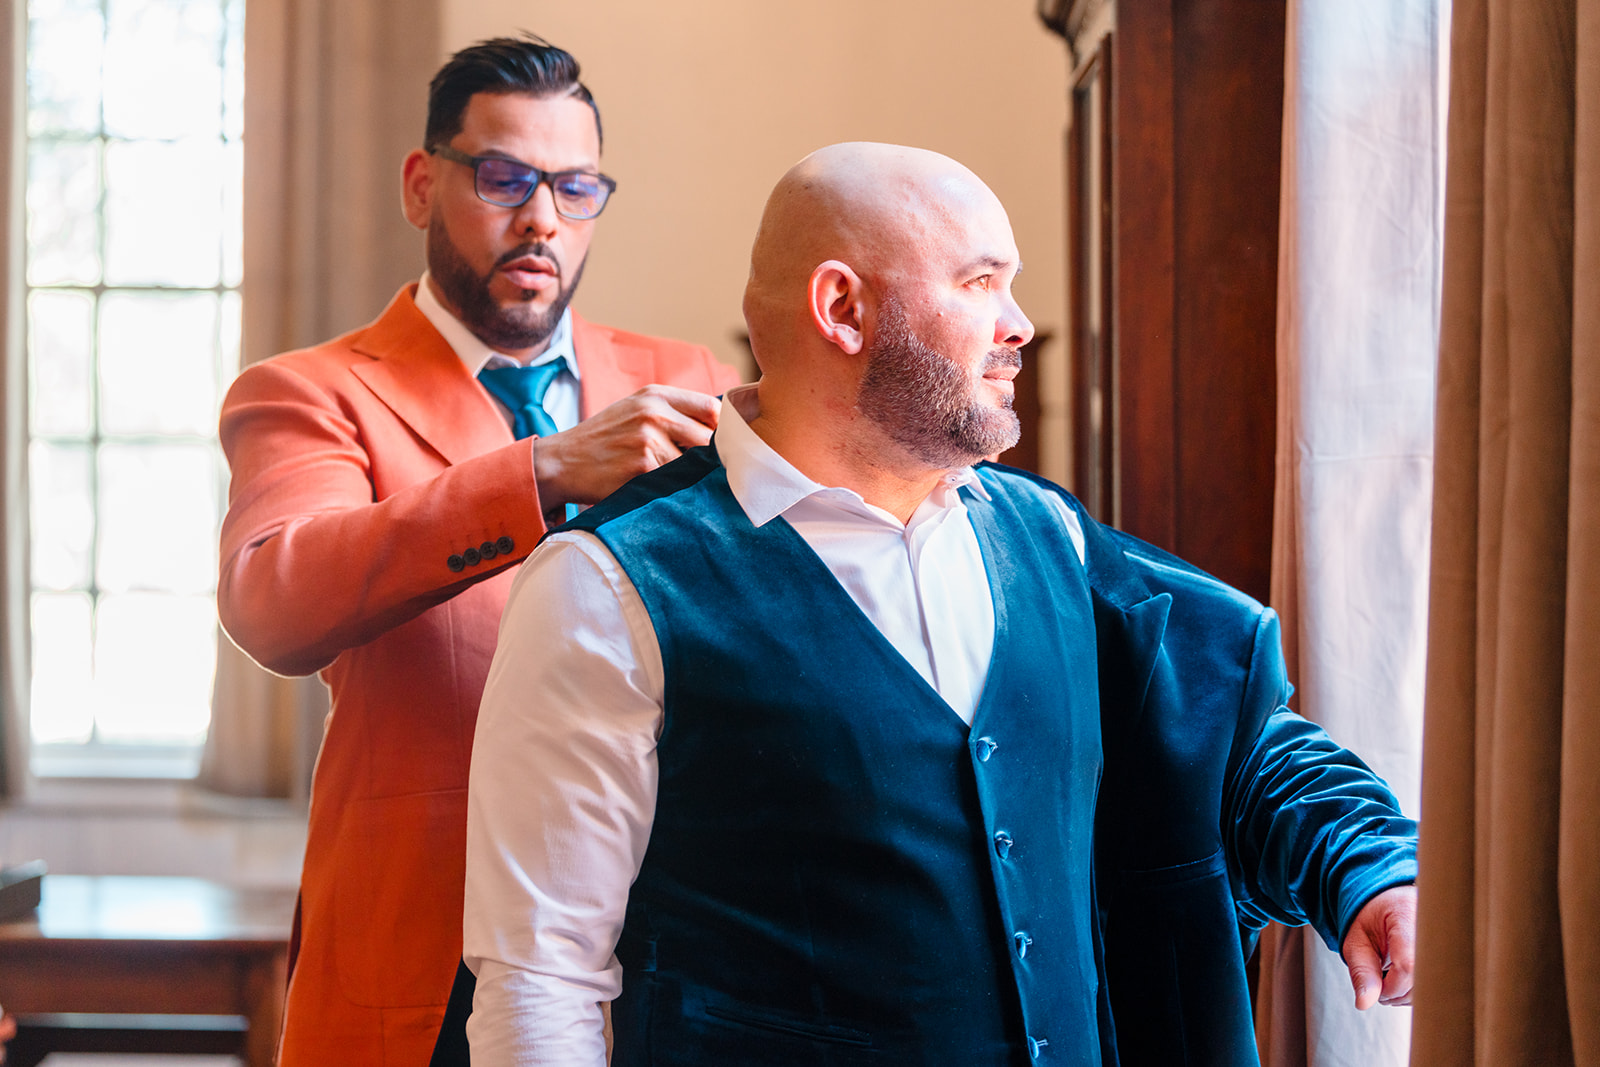 Pre-wedding moment: Best man helping Alberto with his sports coat as he gazes out the window at the beauty of Venue 1902.